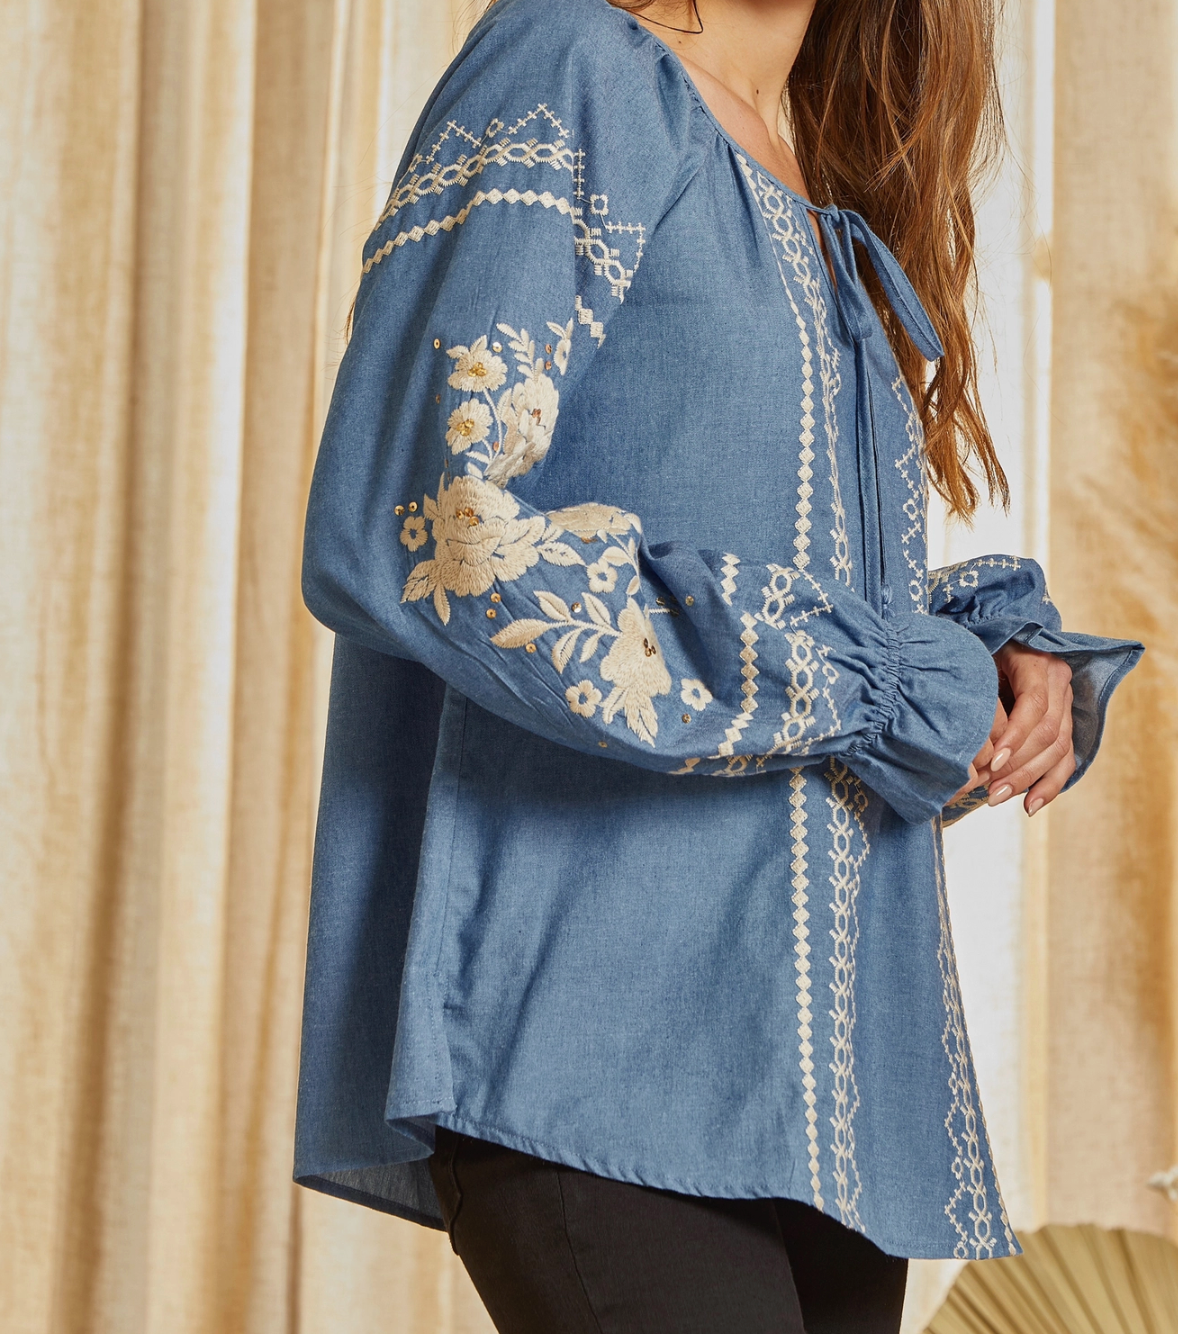 Embroidered Tunic Top in Denim - The Street Boutique 